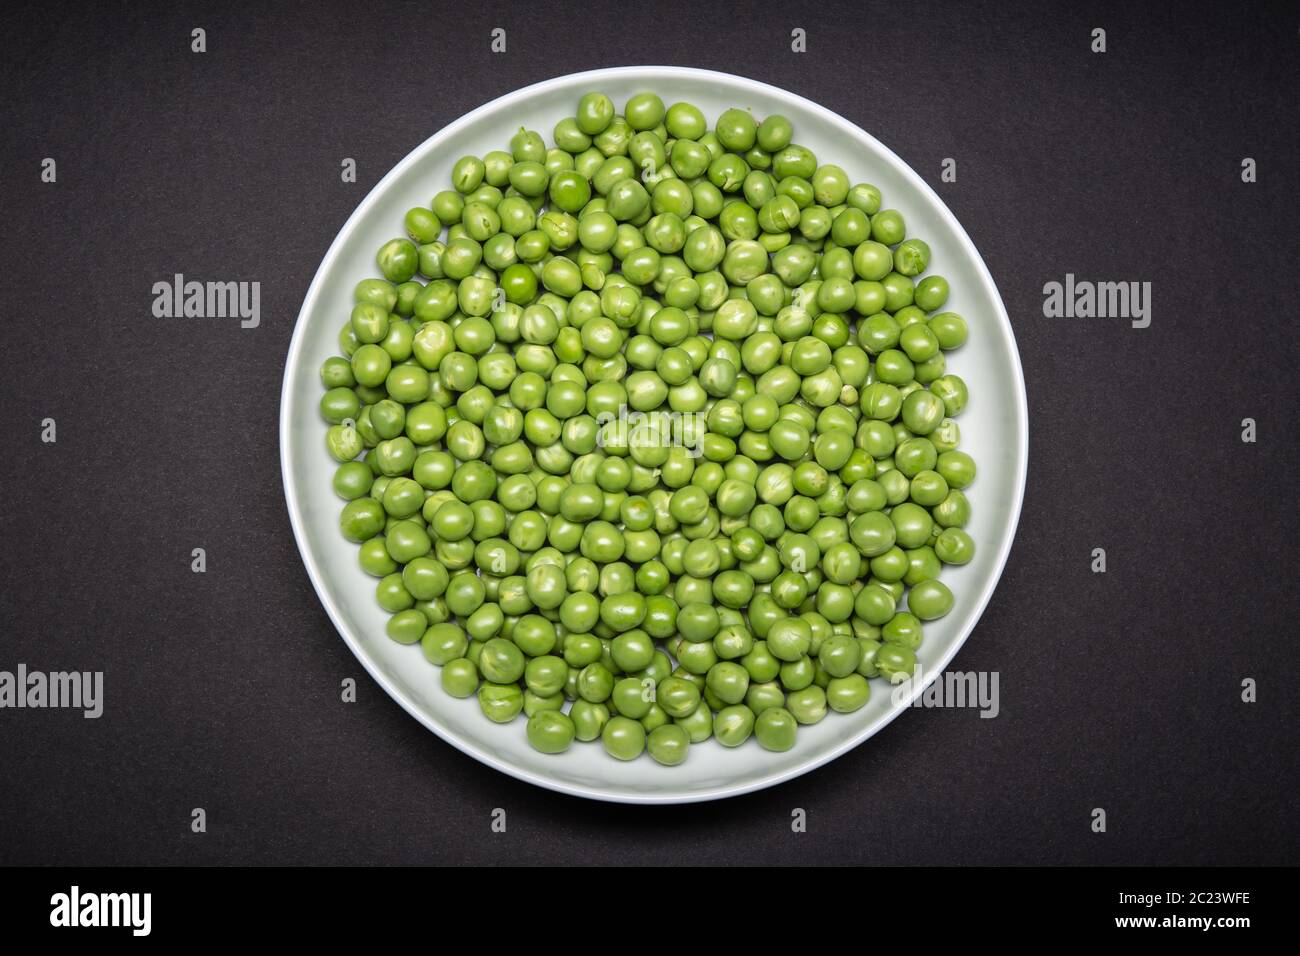 Top view of a plate with fresh Green pea isolated on black background. Pisum sativum Stock Photo